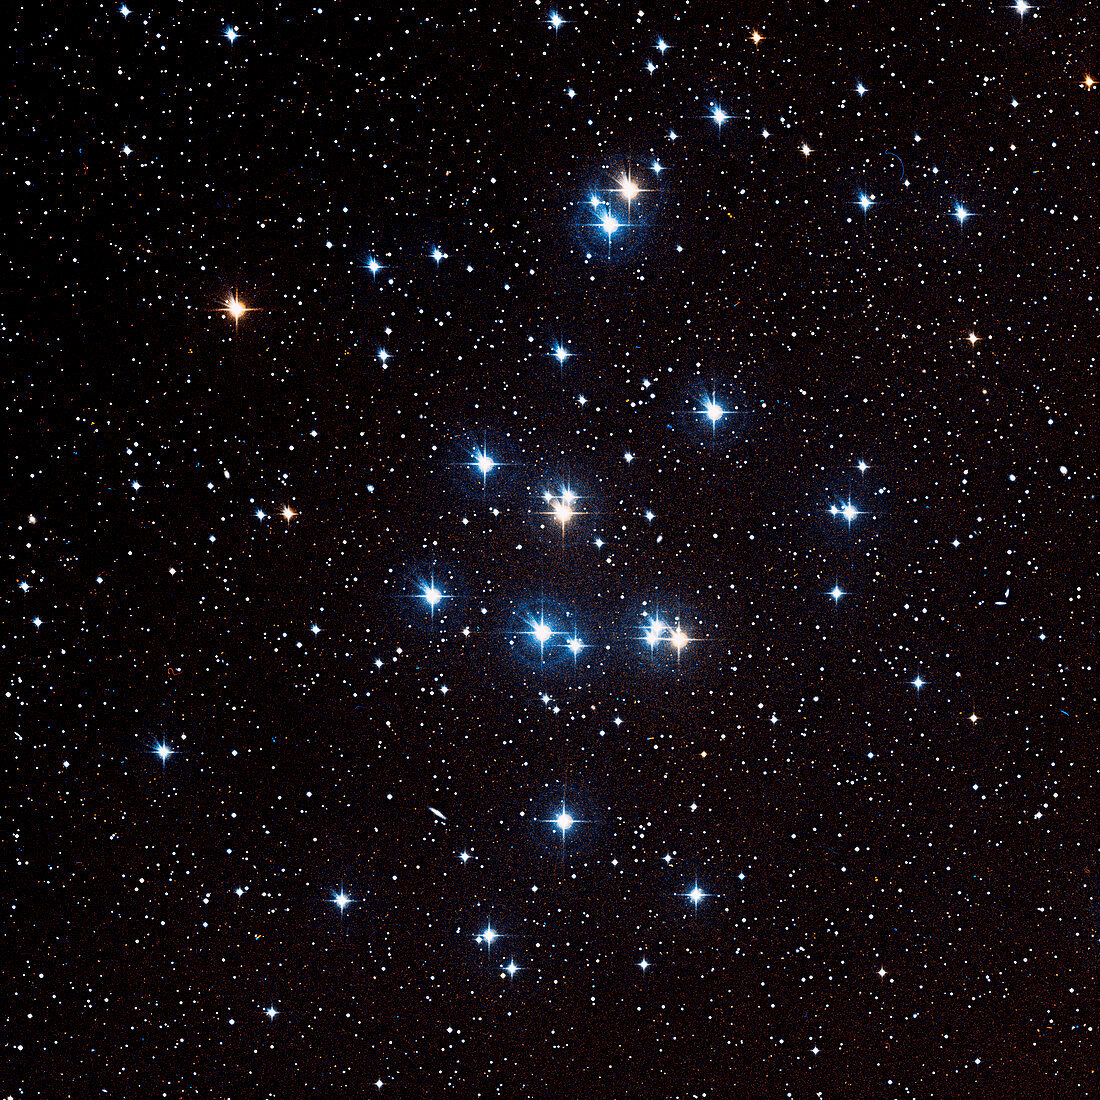 Beehive star cluster (M44)